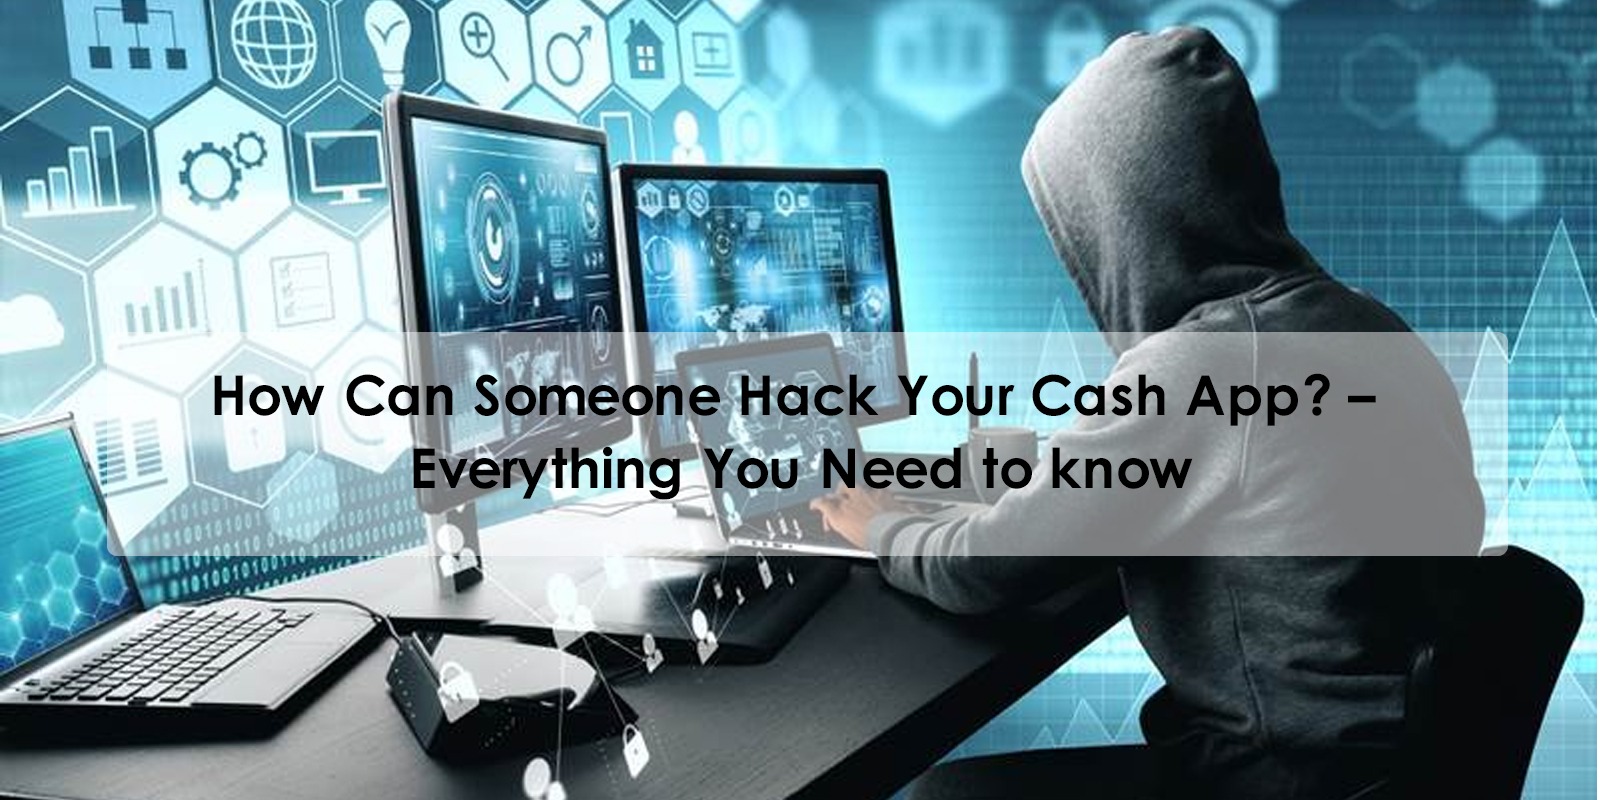 How Can Someone Hack Your Cash App? – Everything You Need to know